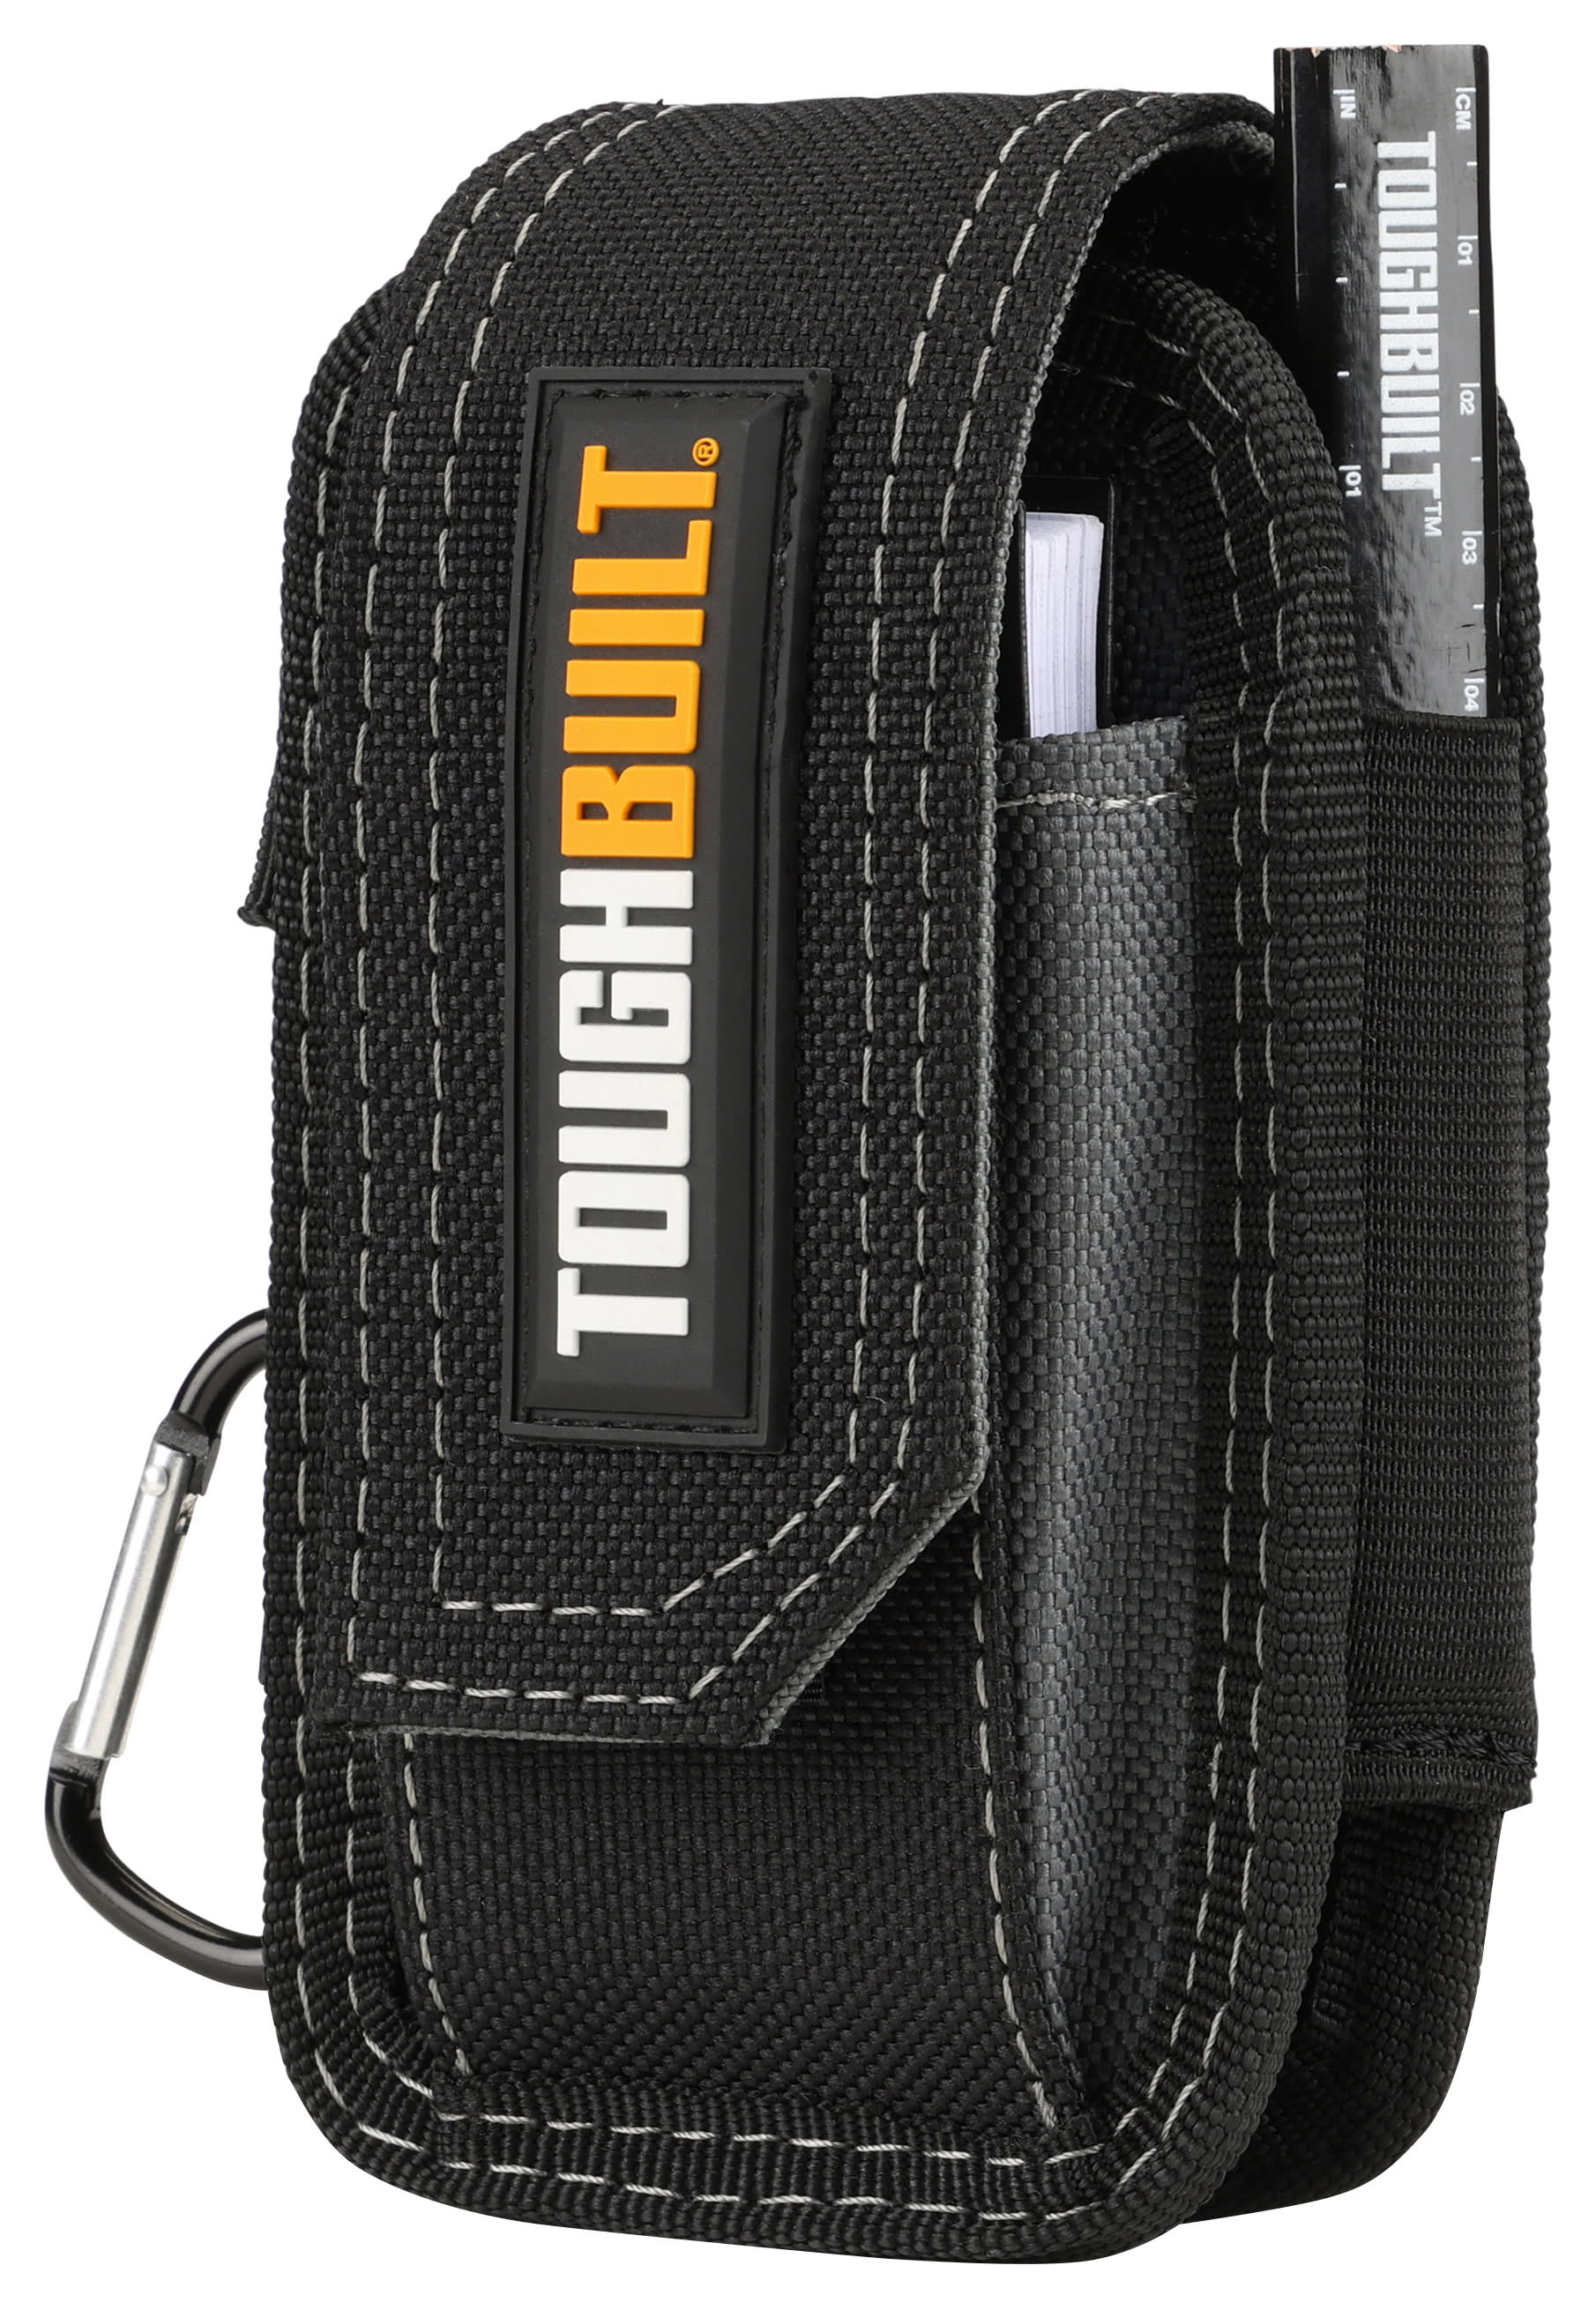 Toughbuilt® TB-33-BEA Smartphone Pouch with Notebook & Pencil